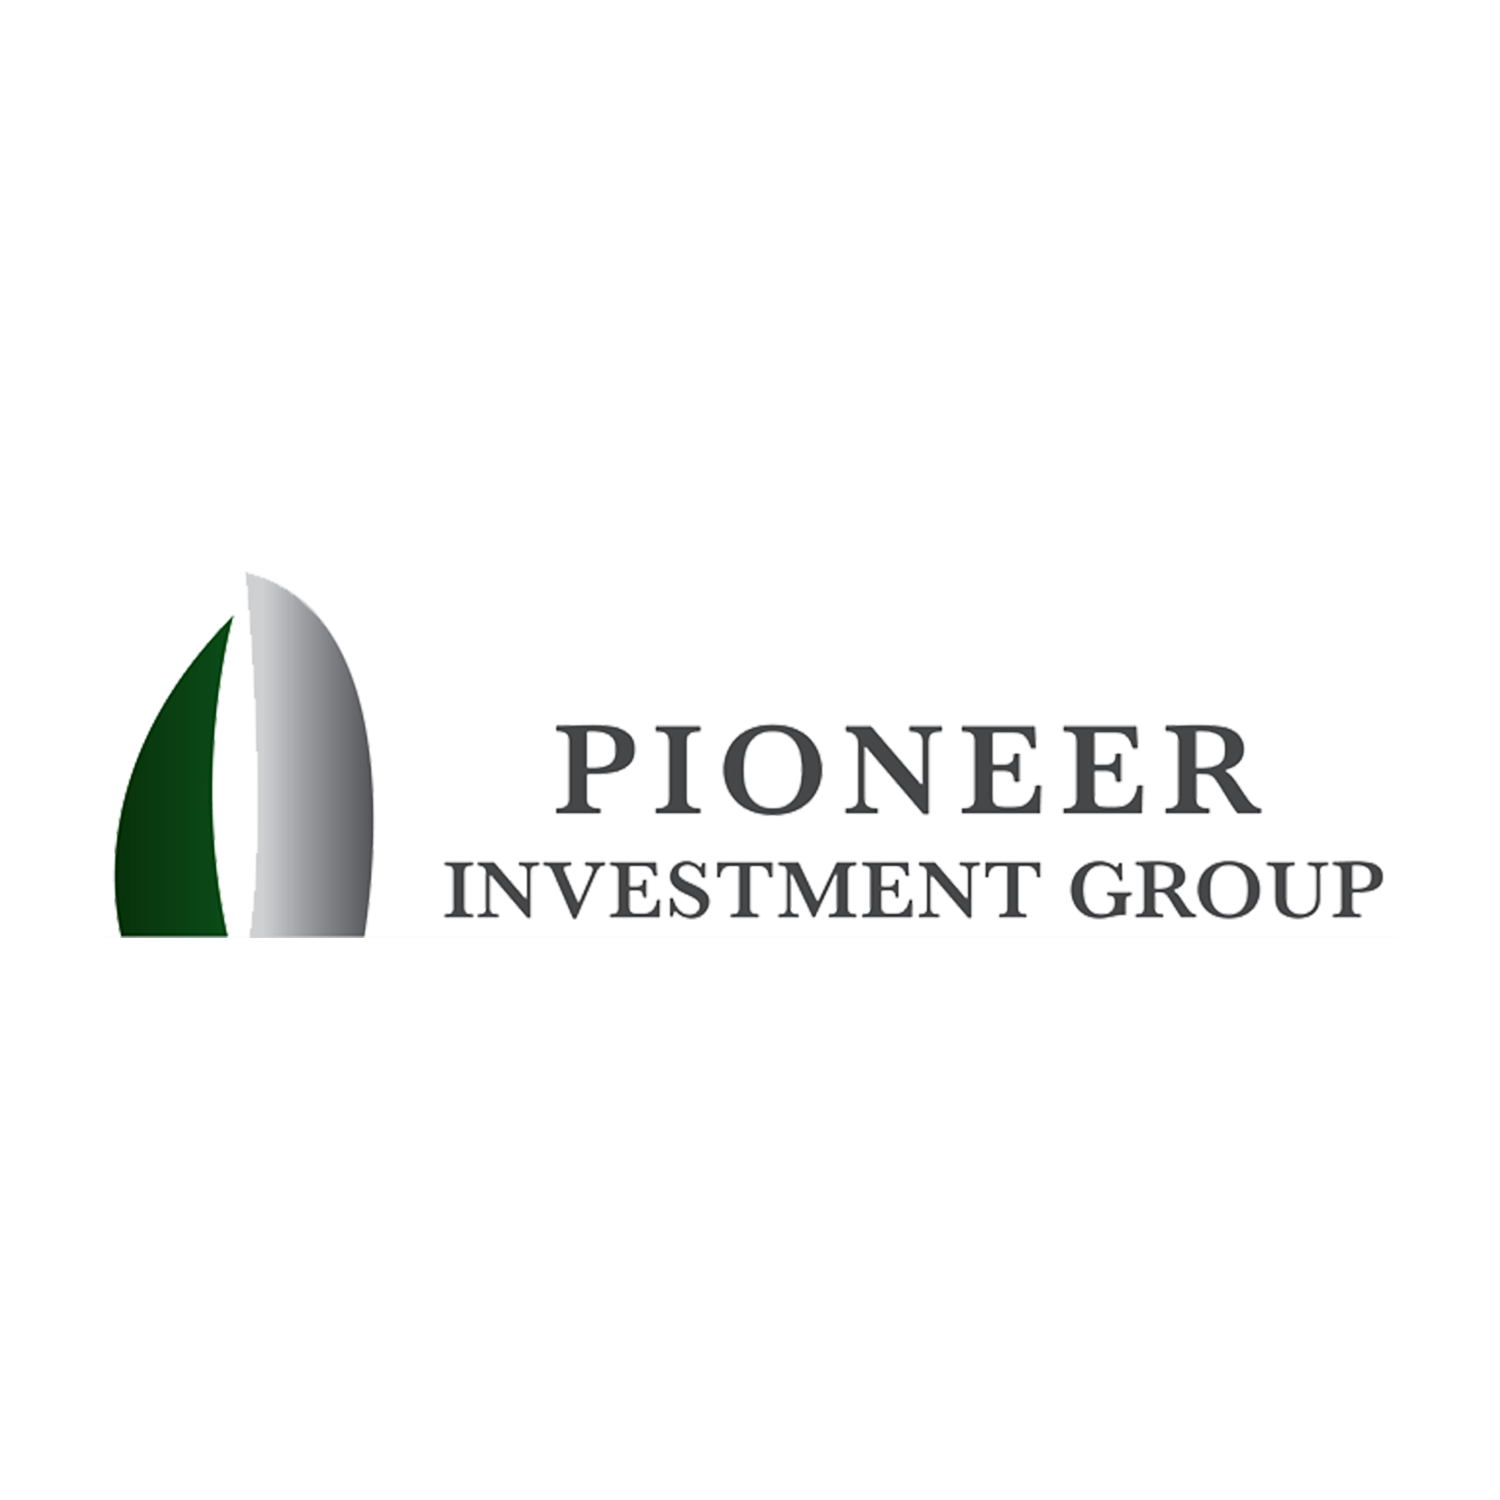 Pioneer Investment Group